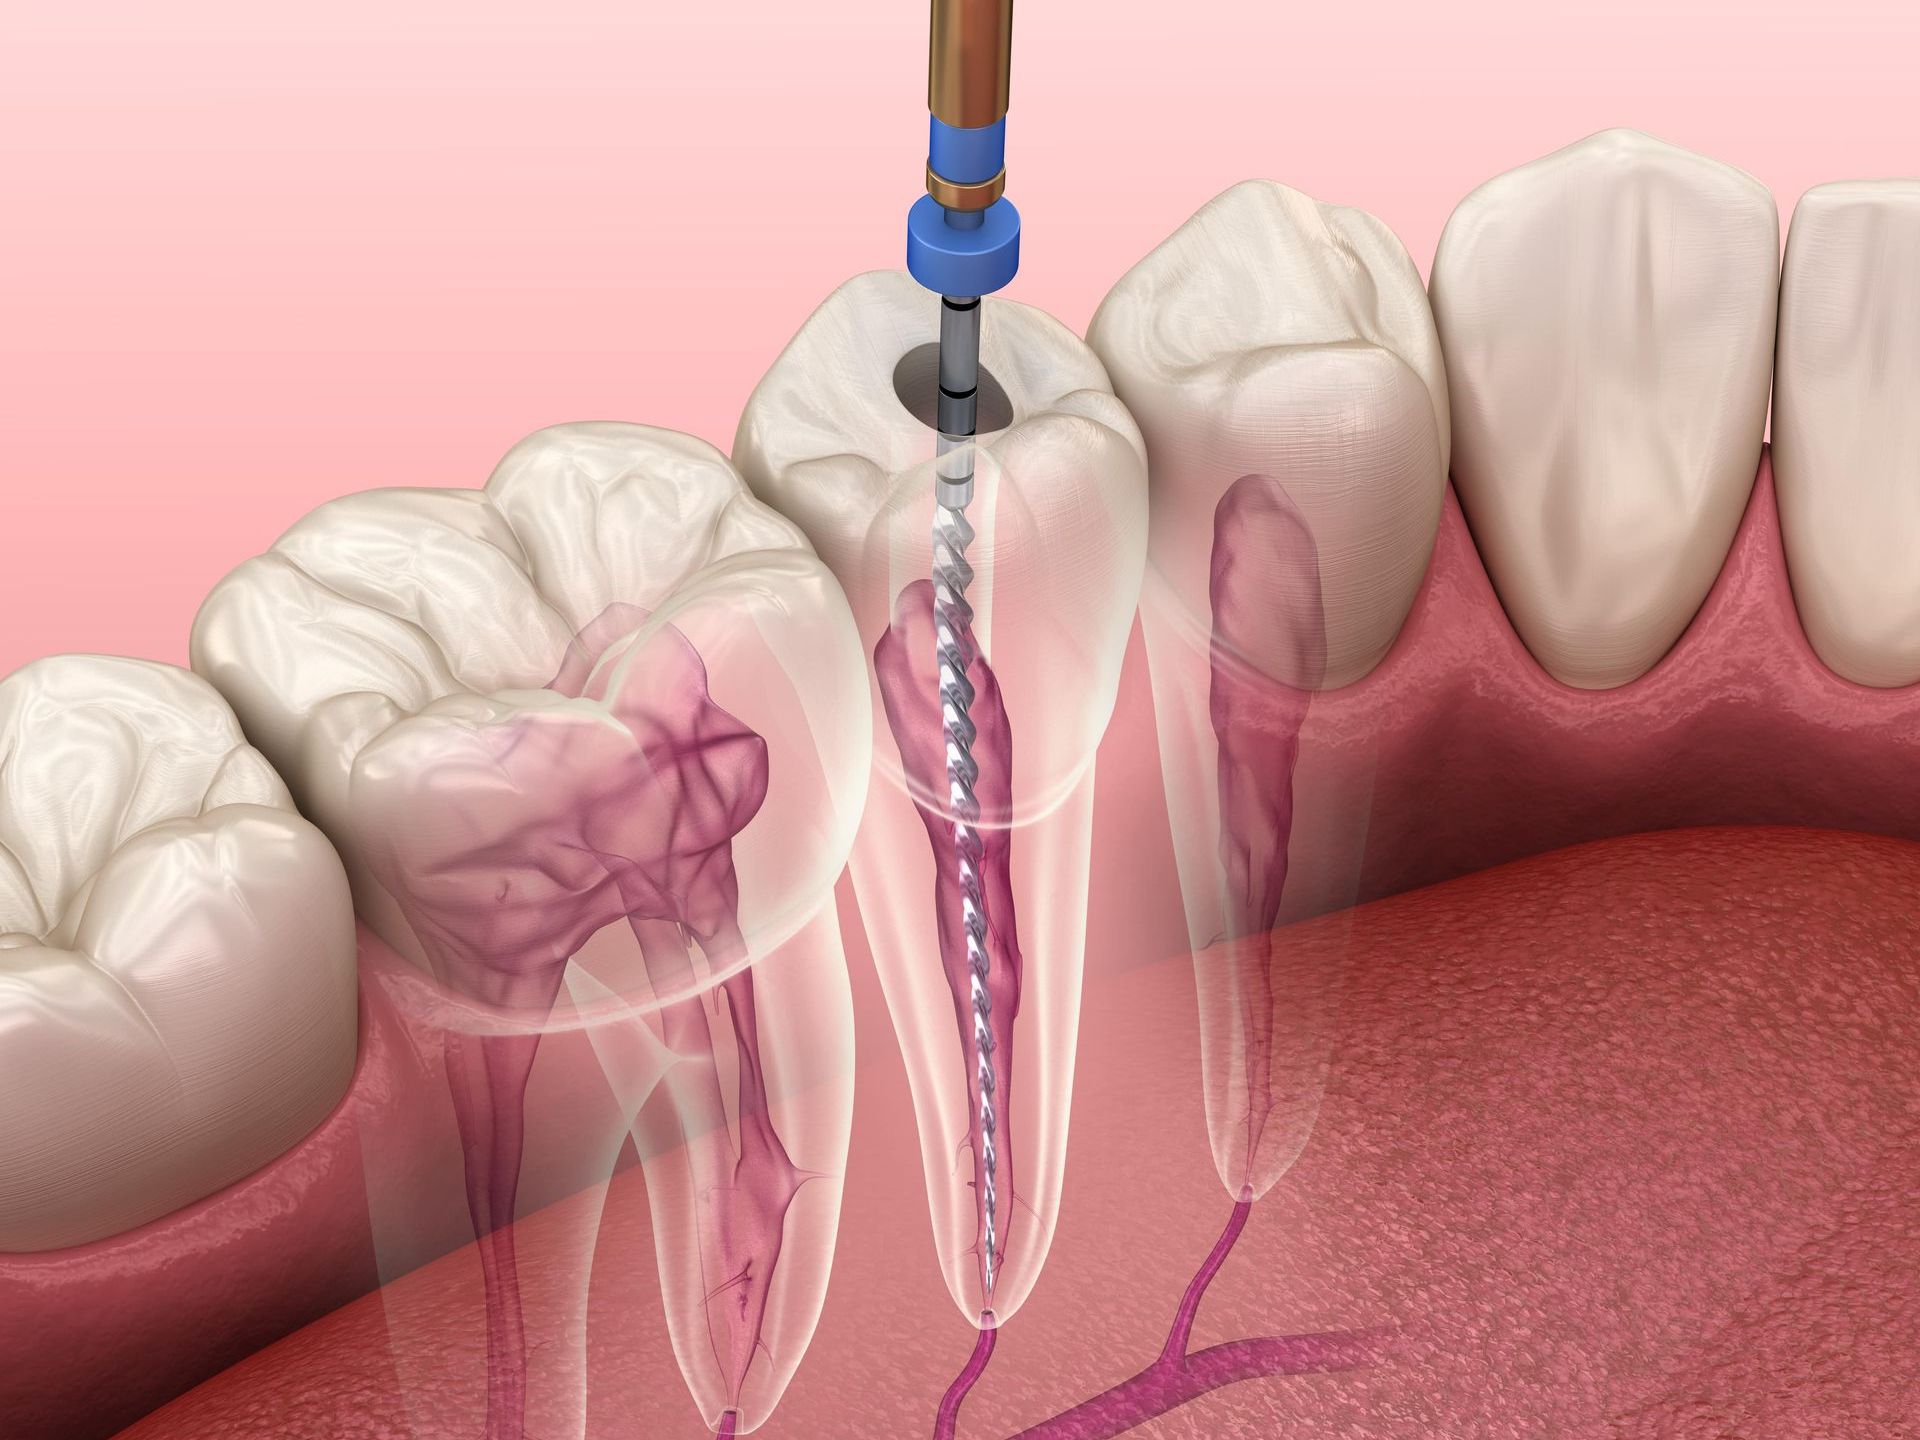 A computer generated image of a tooth root being cleaned with an instrument